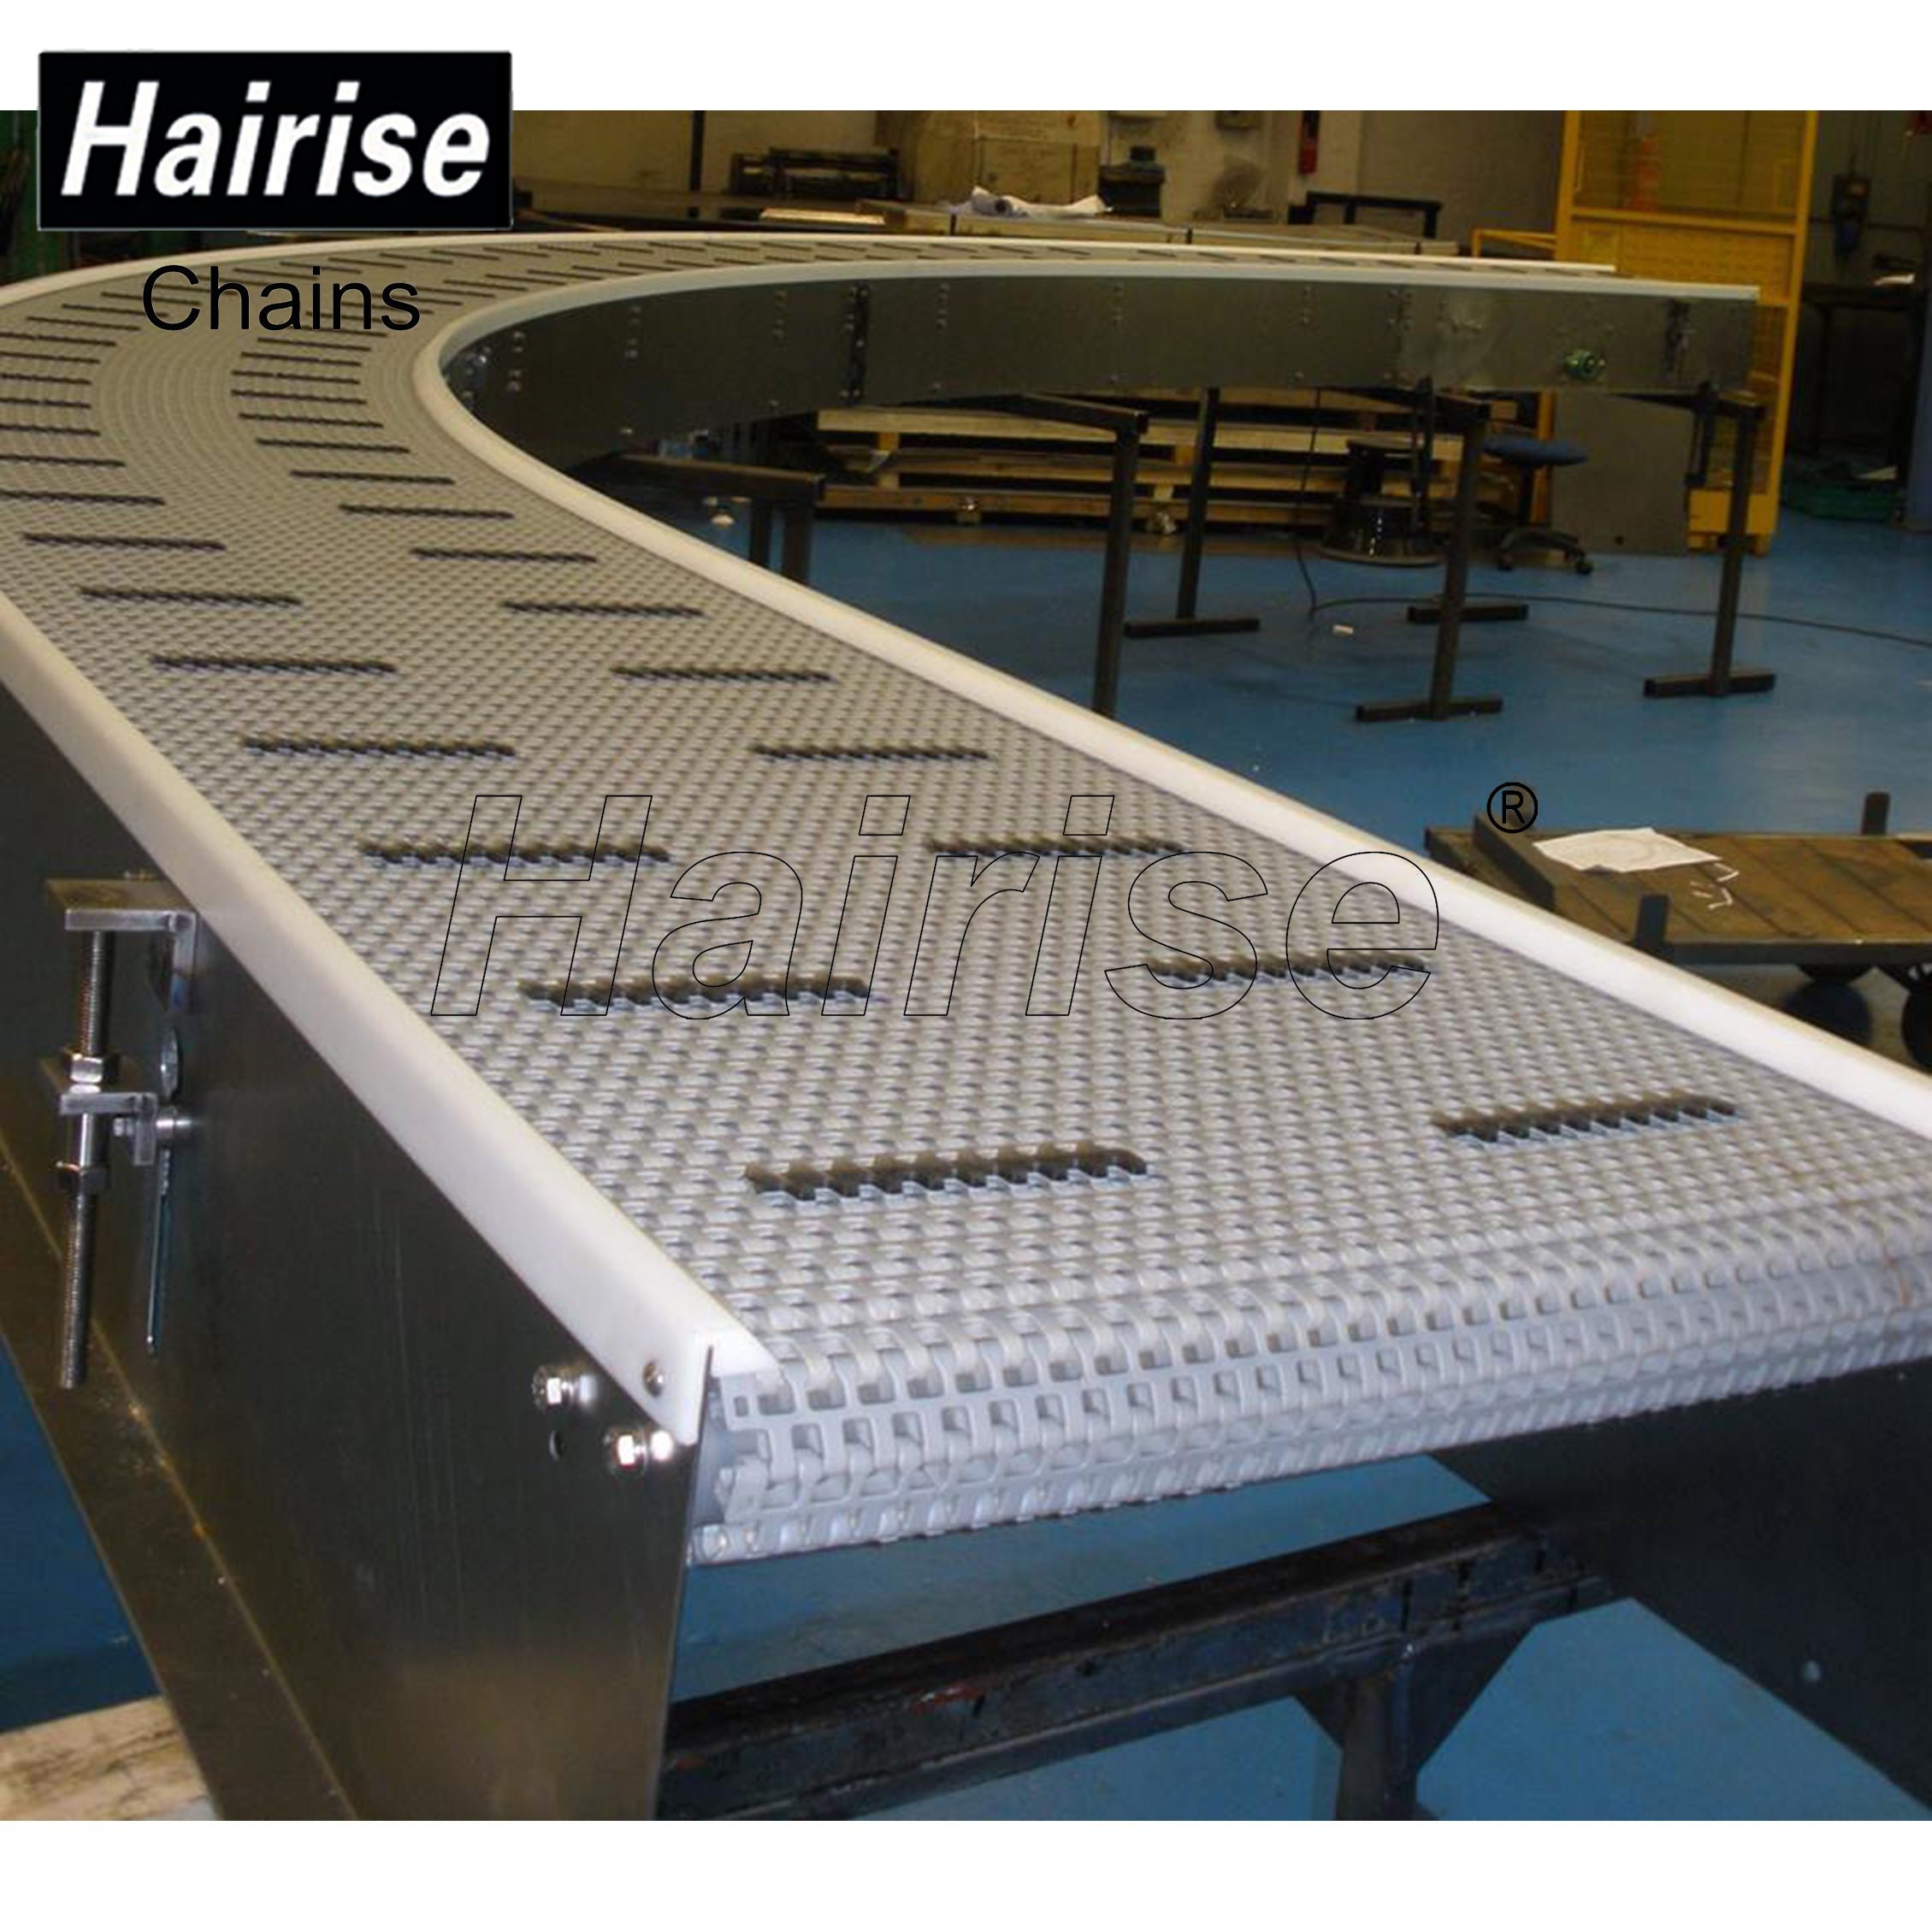 Hairise curved conveyors with modular belts